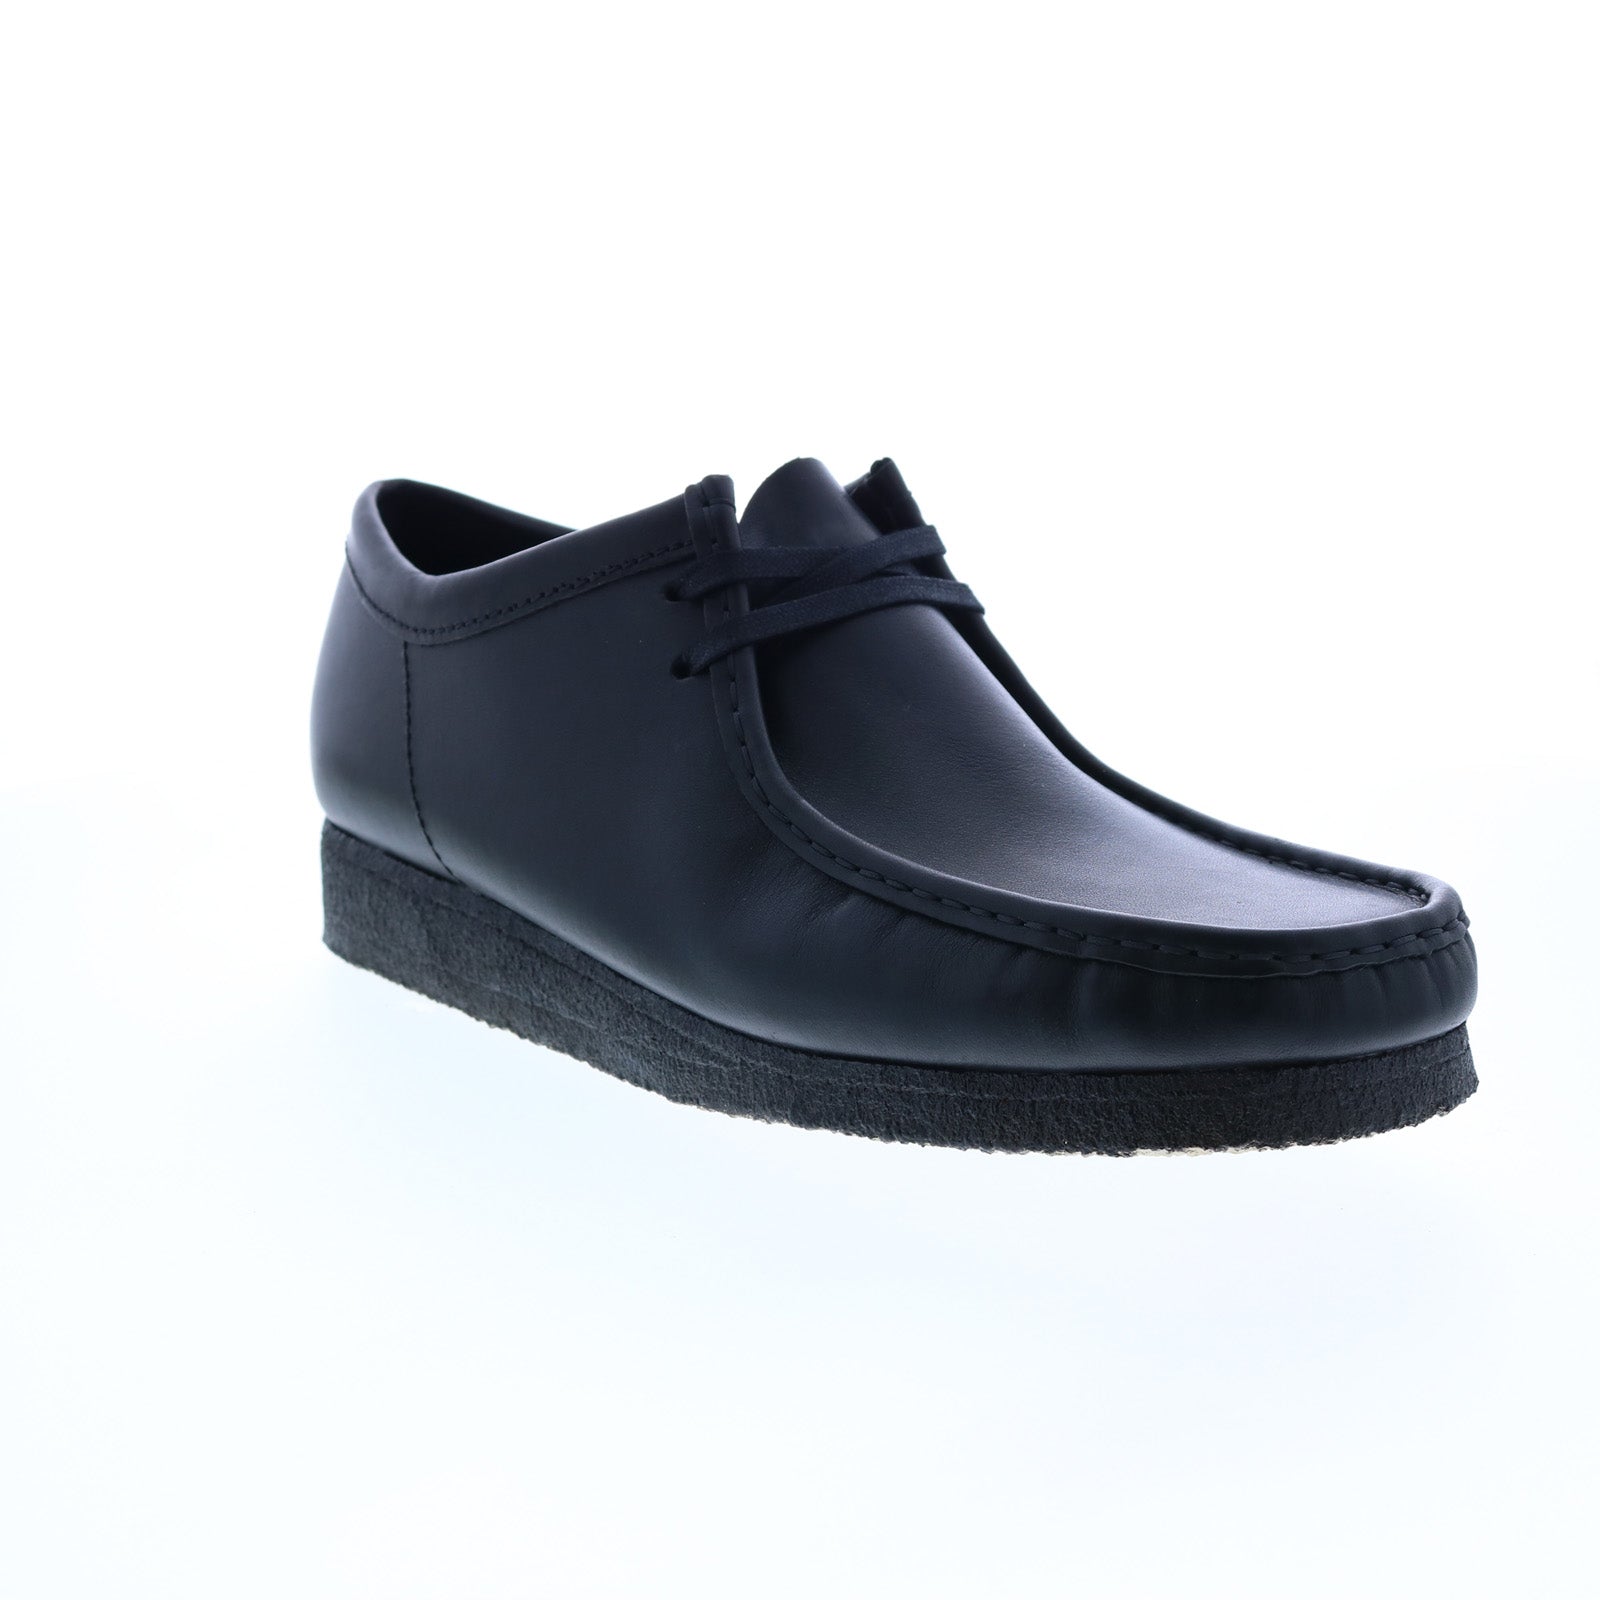 Wallabee Mens Black Oxfords & Lace Ups Casual Shoes - Shoes